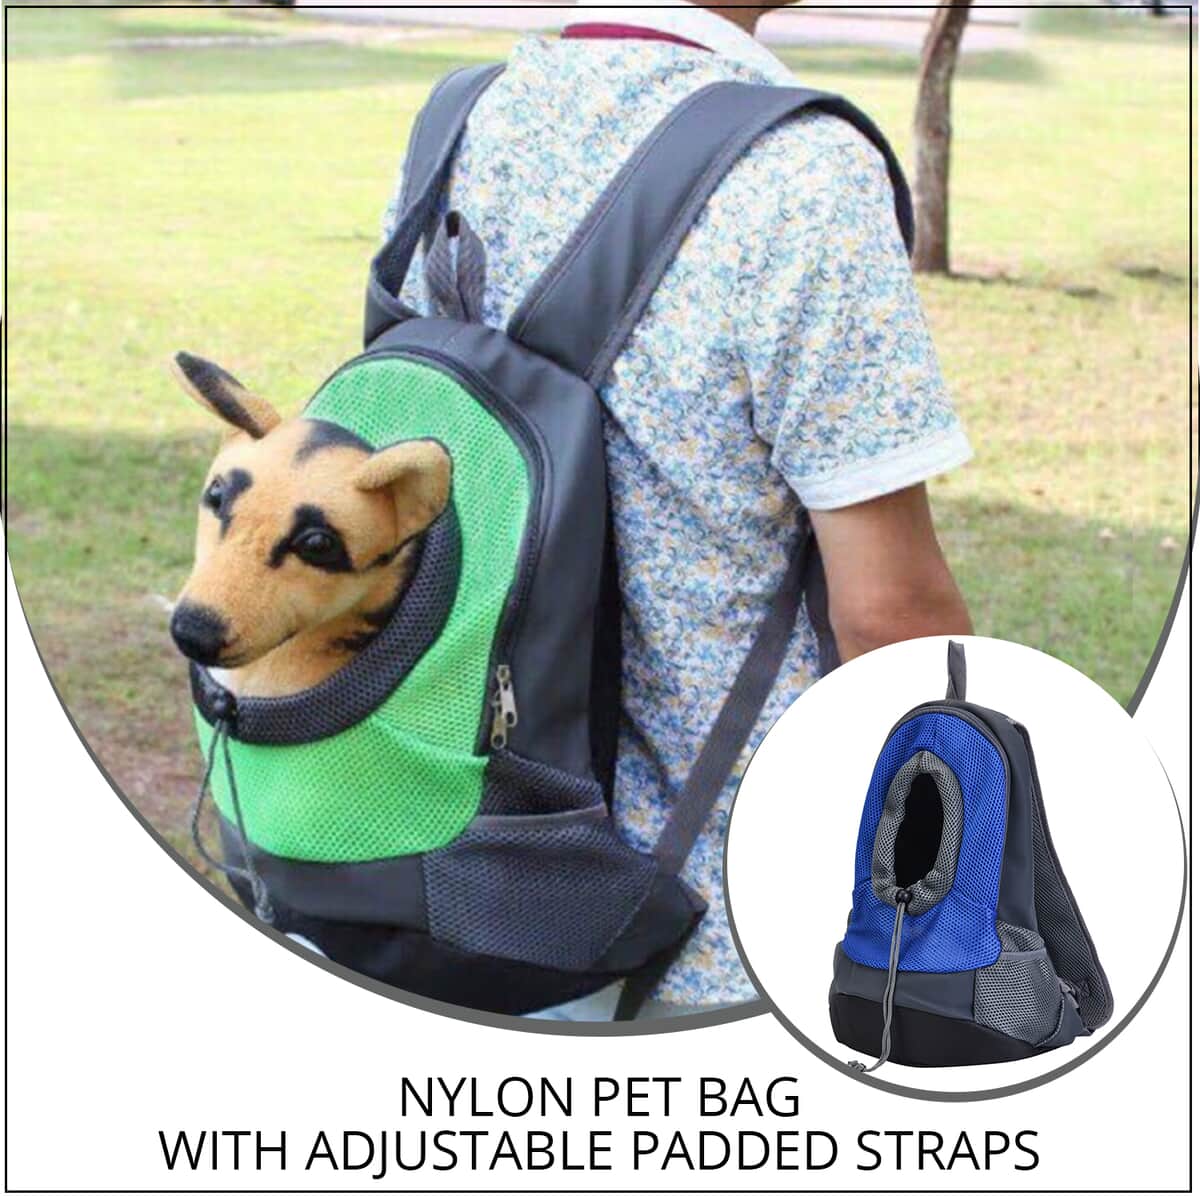 Blue and Grey Nylon Pet Bag (15.74"x12.6"x6.3") with Adjustable Padded Straps image number 1